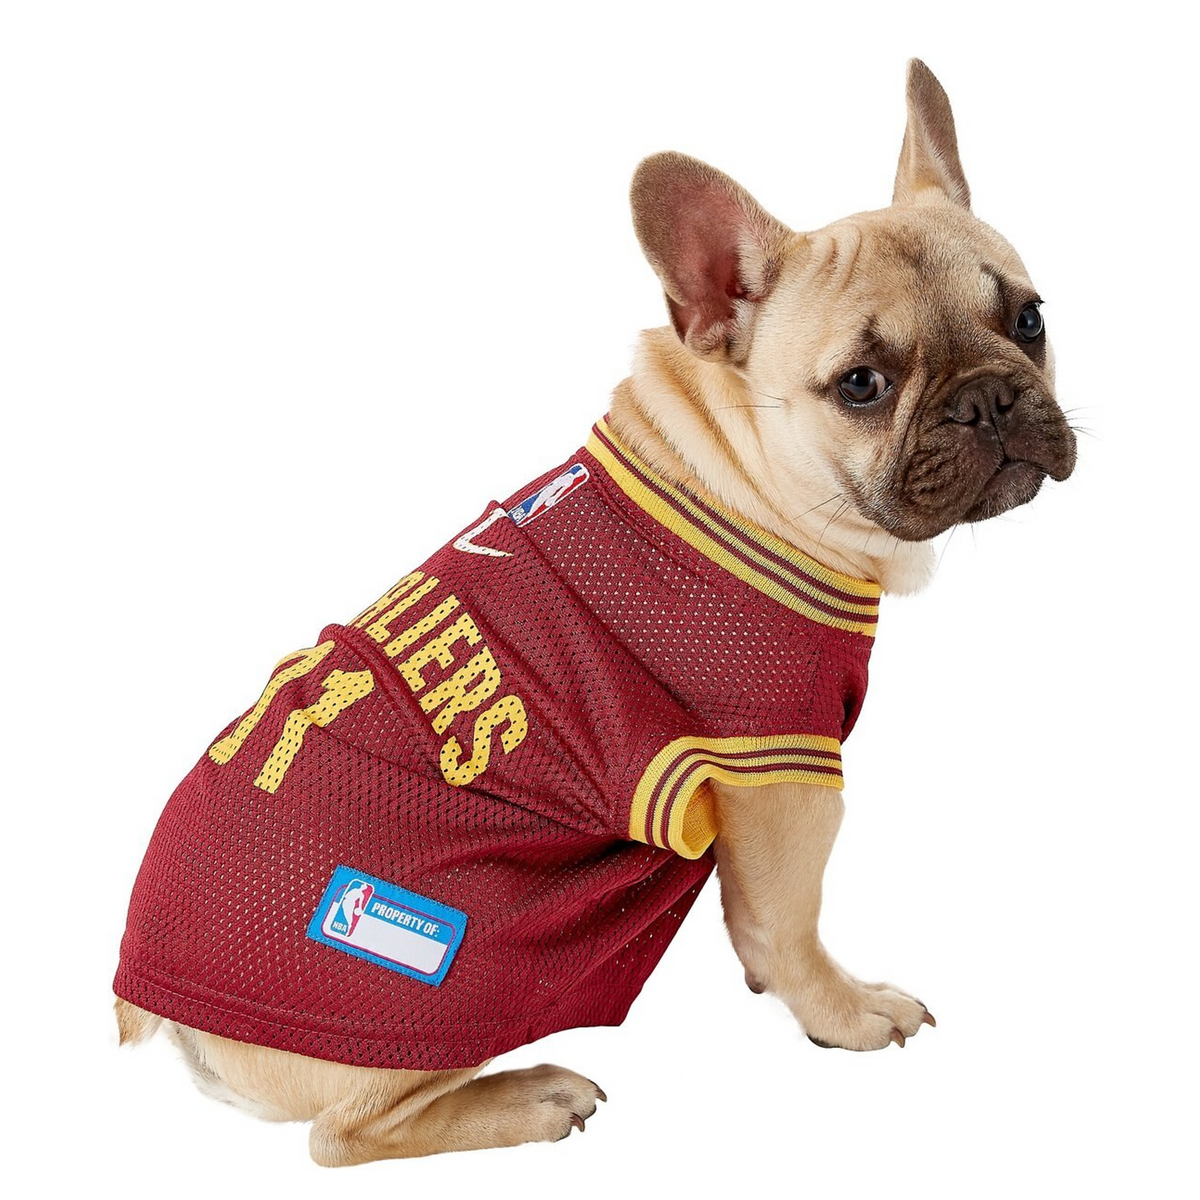 Official Cleveland Cavaliers Pet Gear, Collars, Leashes, Pet Toys